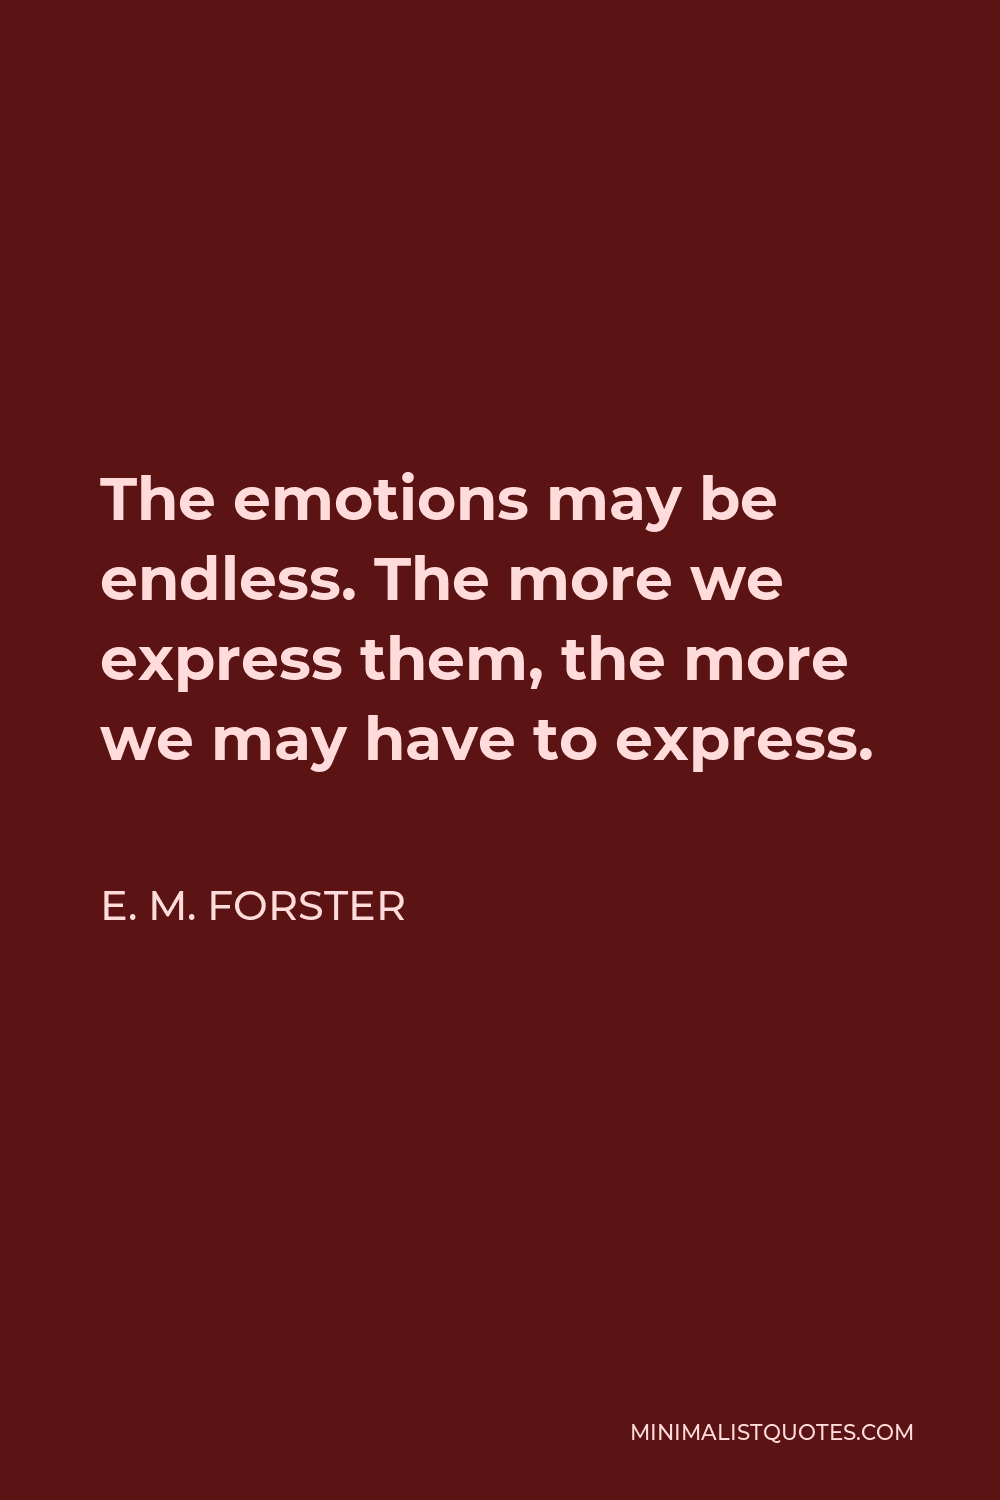 E. M. Forster Quote - The emotions may be endless. The more we express them, the more we may have to express.